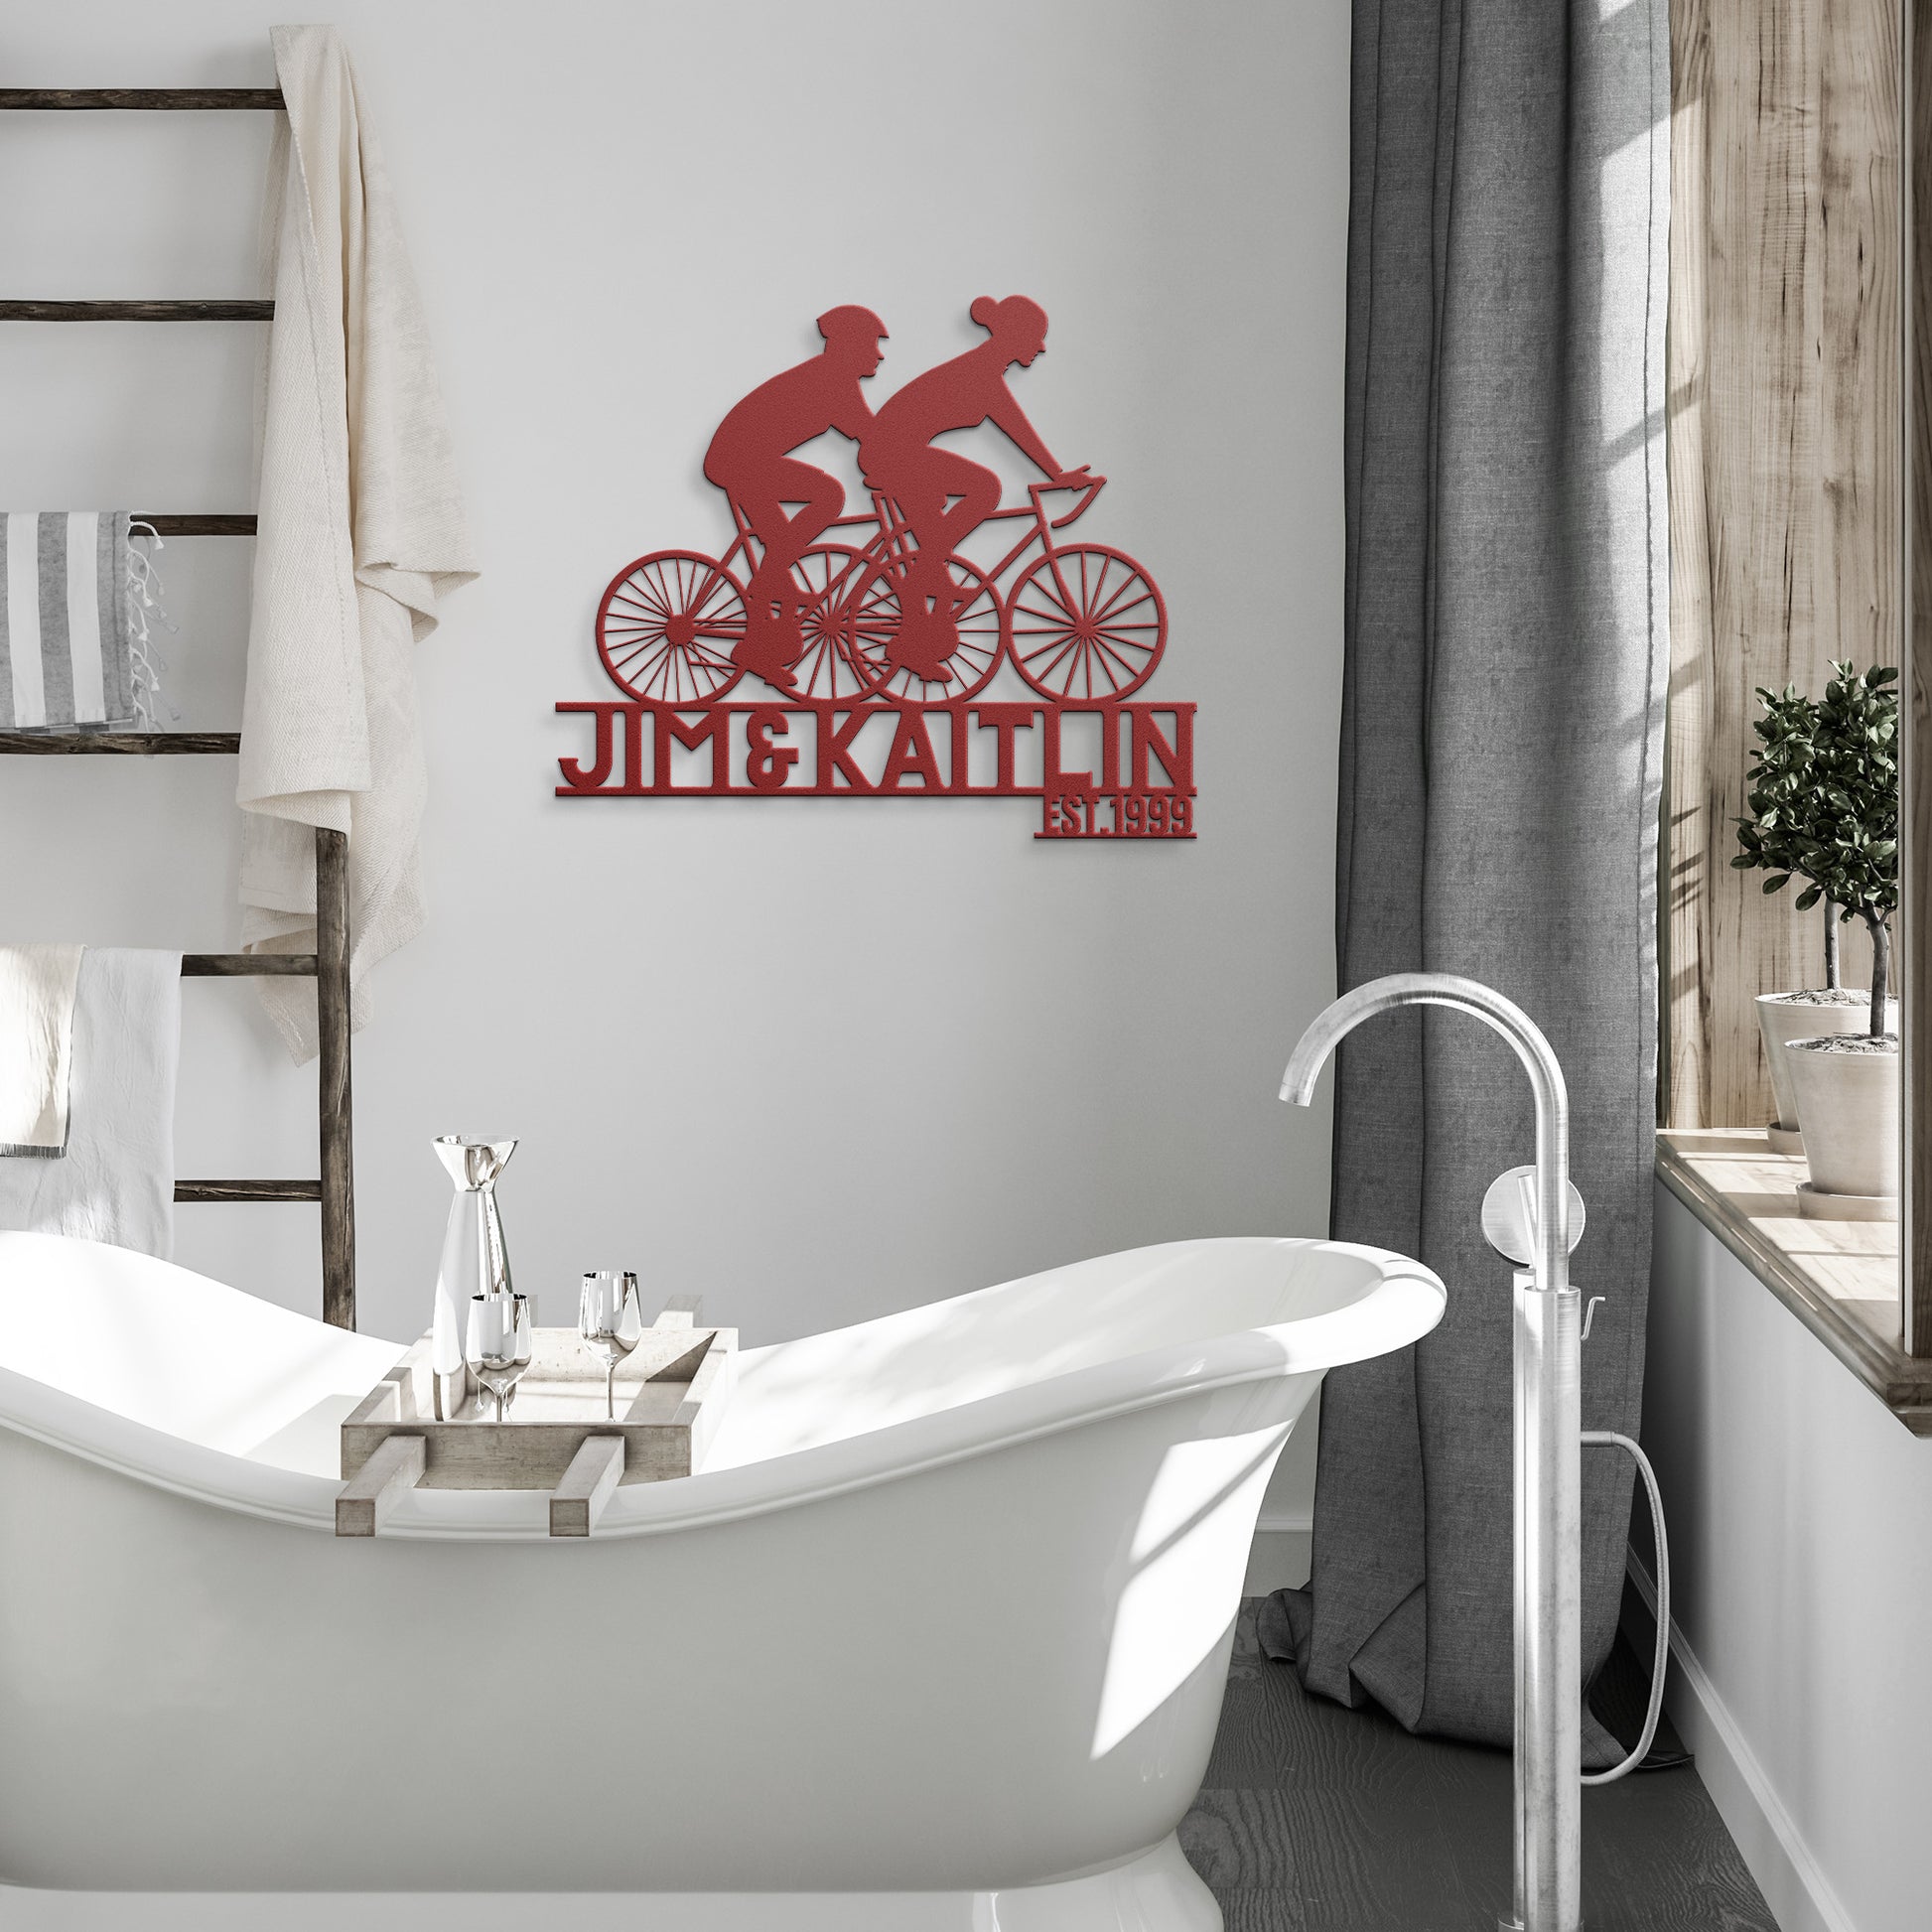 A teelaunch Personalized Couple Cycling Metal Wall Art Sign featuring a powder coated metal sign on the wall, along with a bathtub and a bike.